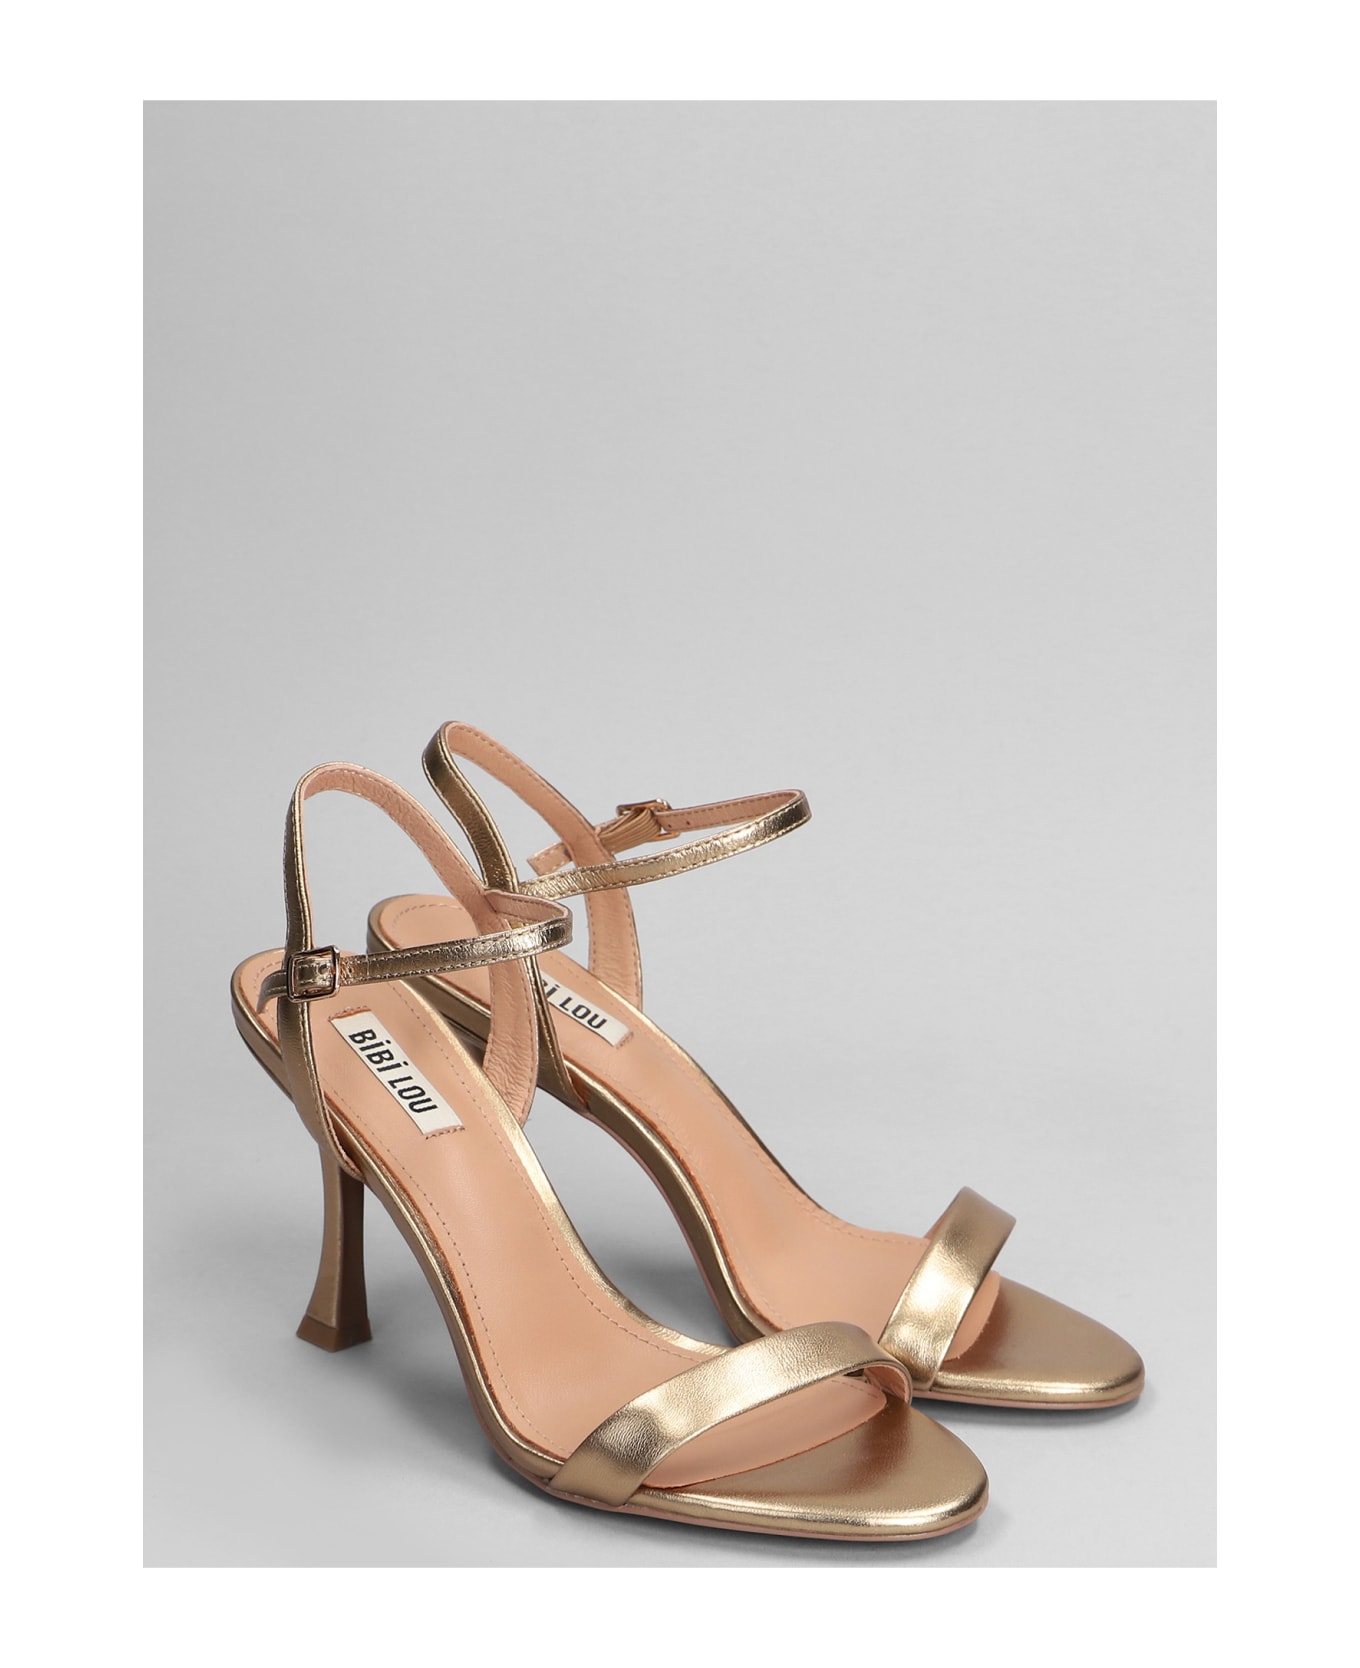 Bibi Lou Lotus 85 Sandals In Gold Leather - gold